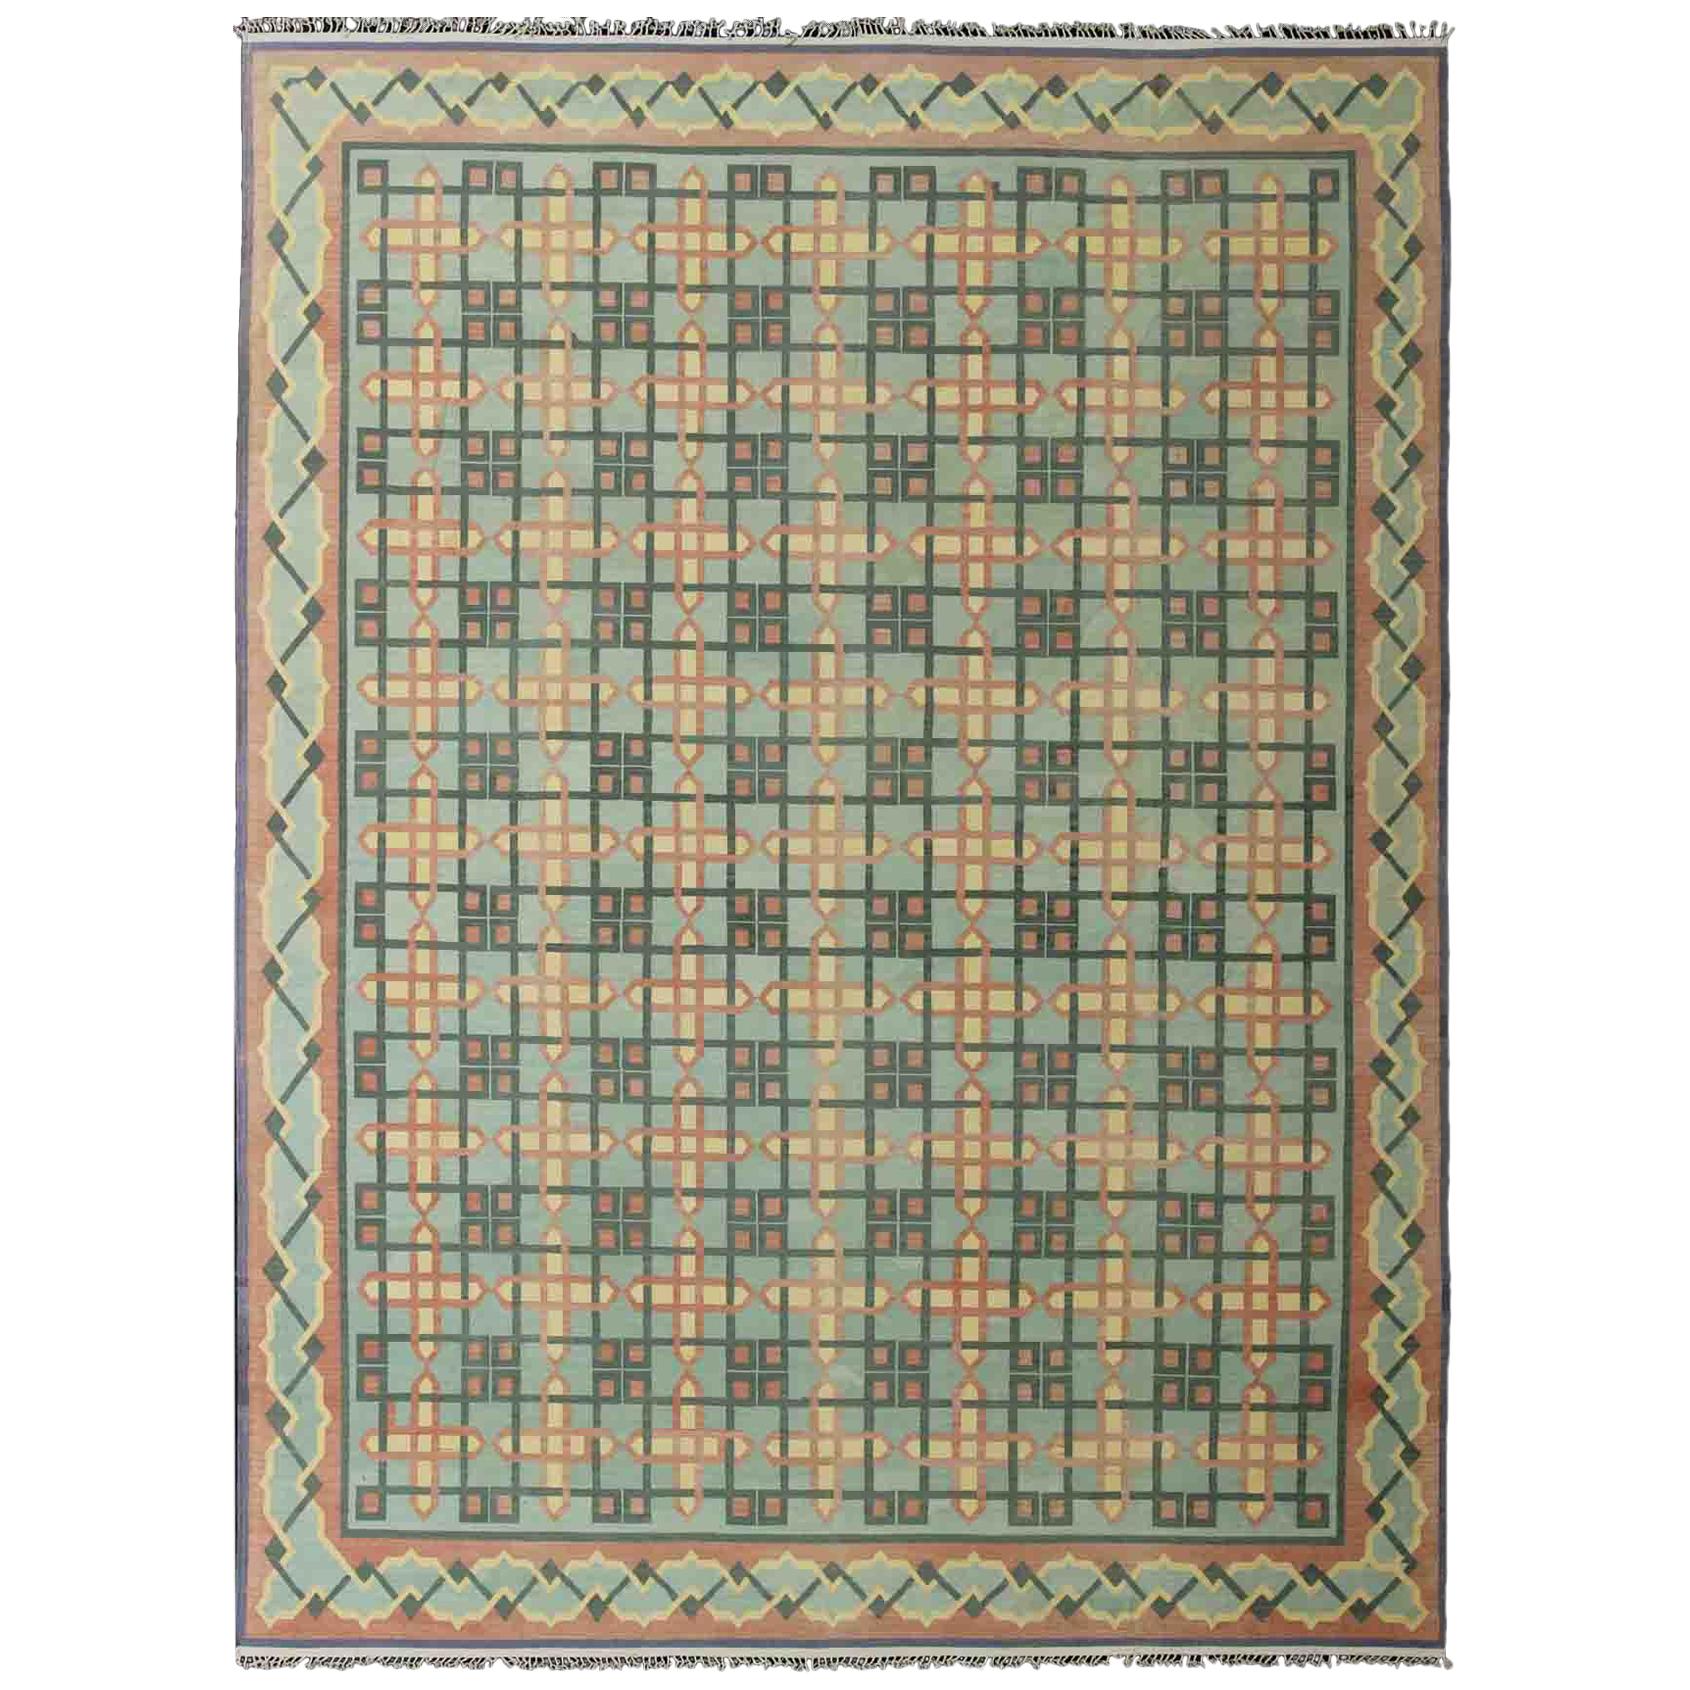 Large Vintage Indian Flat-Weave Cotton Dhurrie Rug from Mid-20th Century